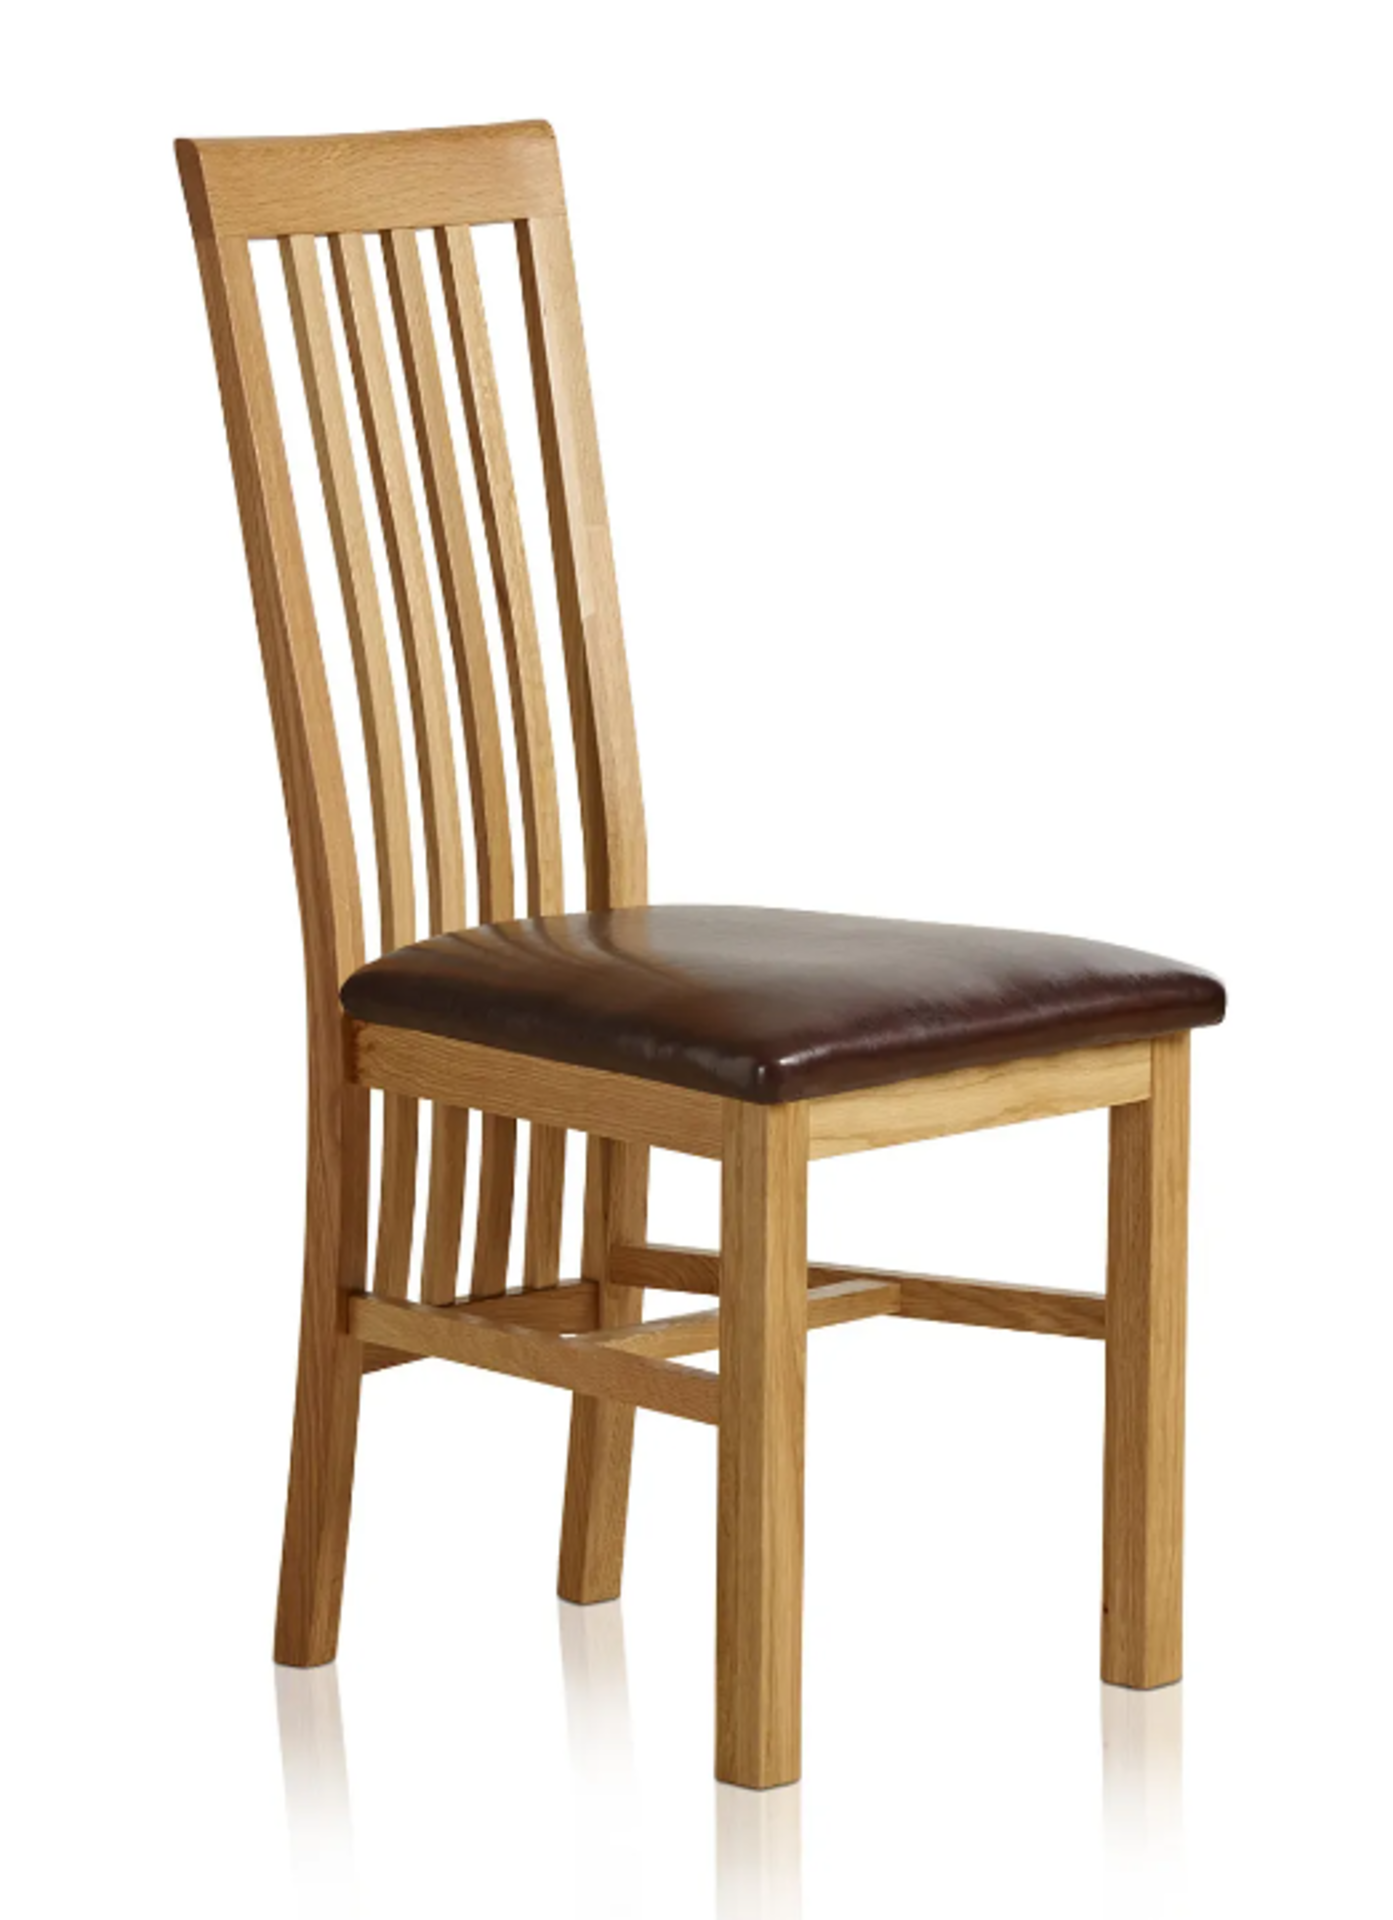 Pair of SLAT BACK NATURAL OAK Dining Chair. RRP £195.00. The Slat Back Natural Solid Oak perfectly